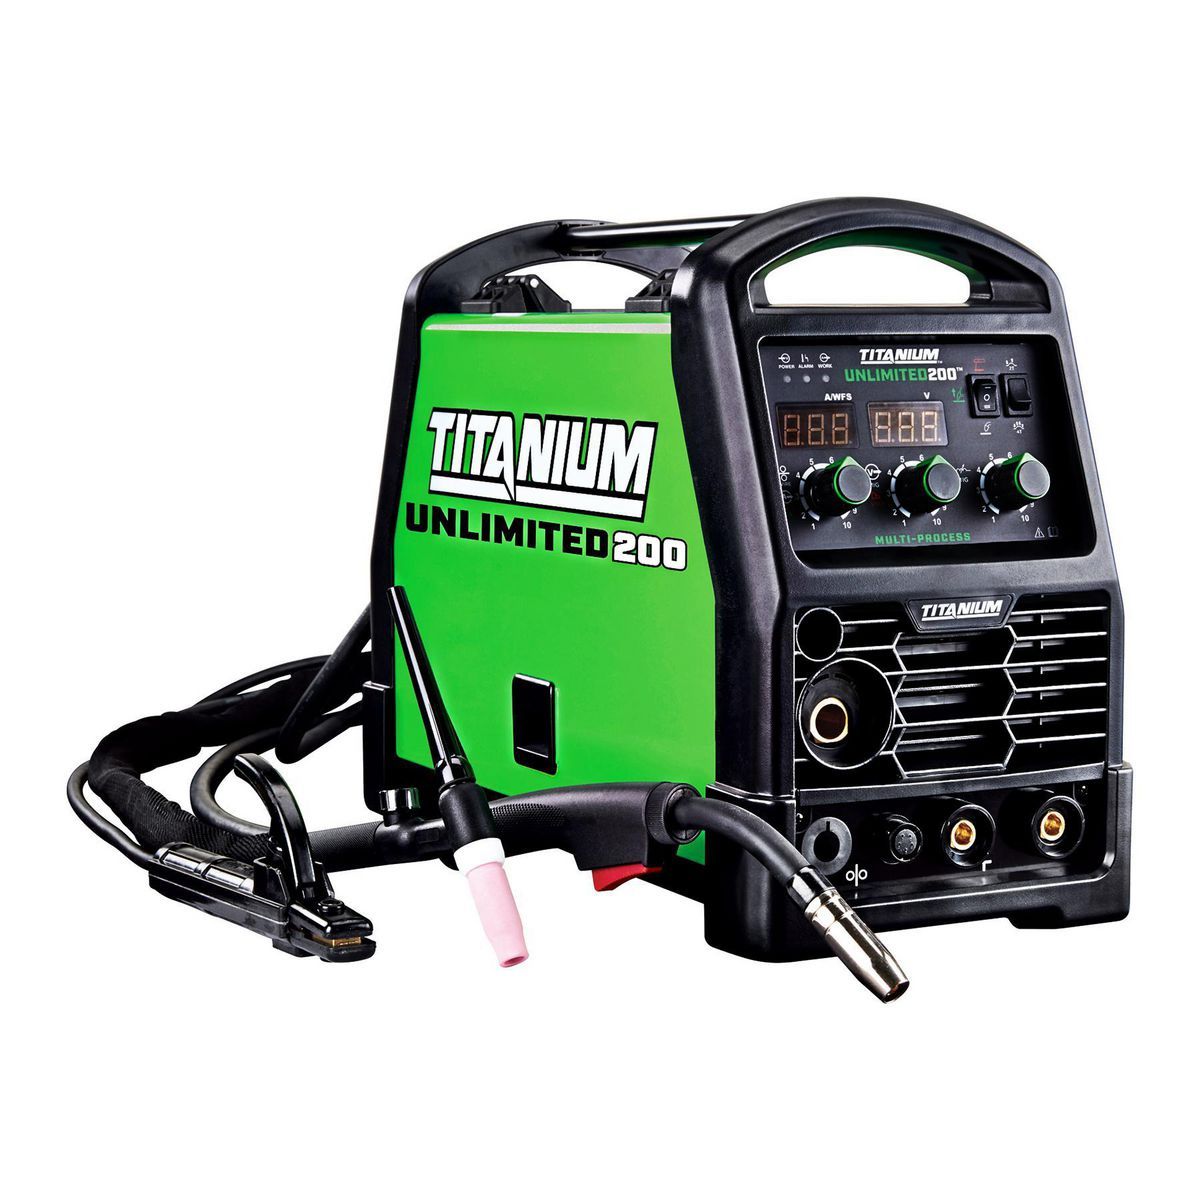 Unlimited 200™ Professional Multiprocess Welder with 120/240v Input